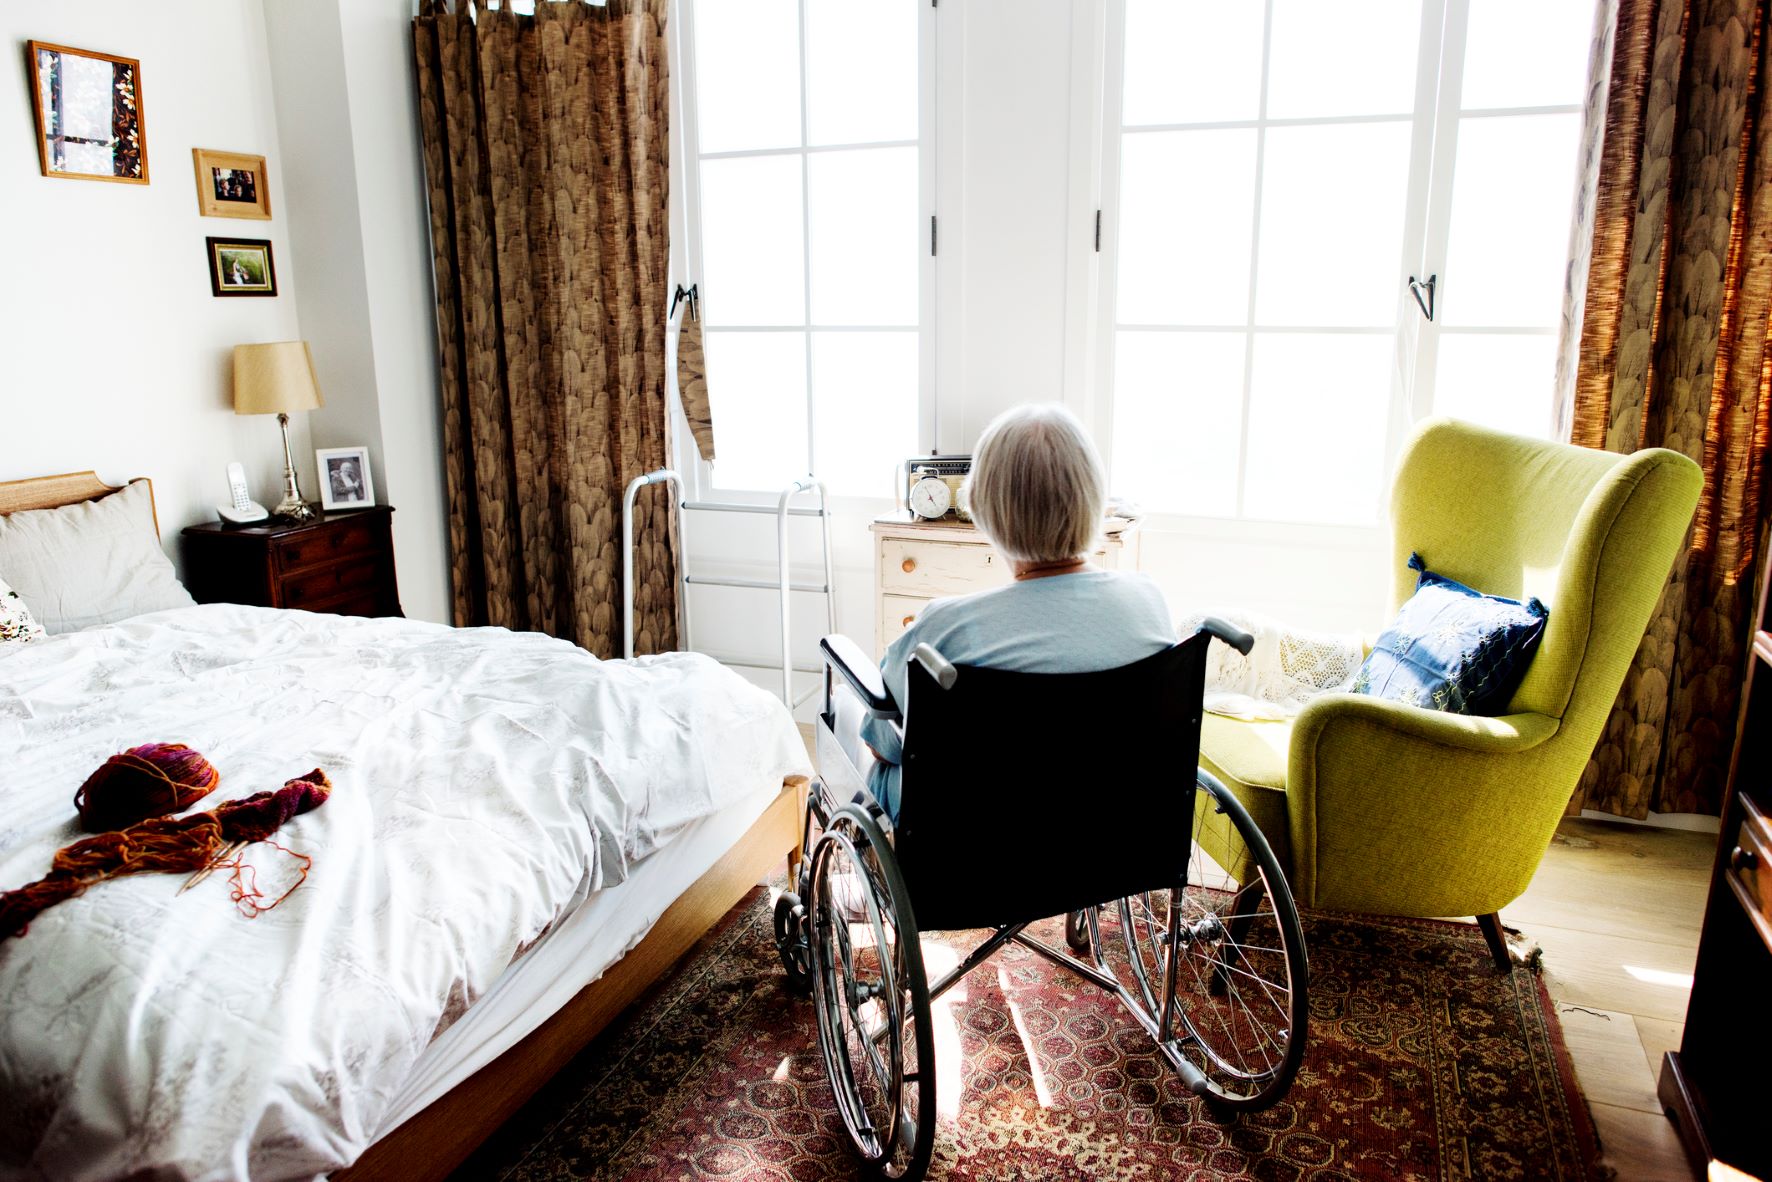 Senior woman in a wheel chair looking out a window of her bedroom